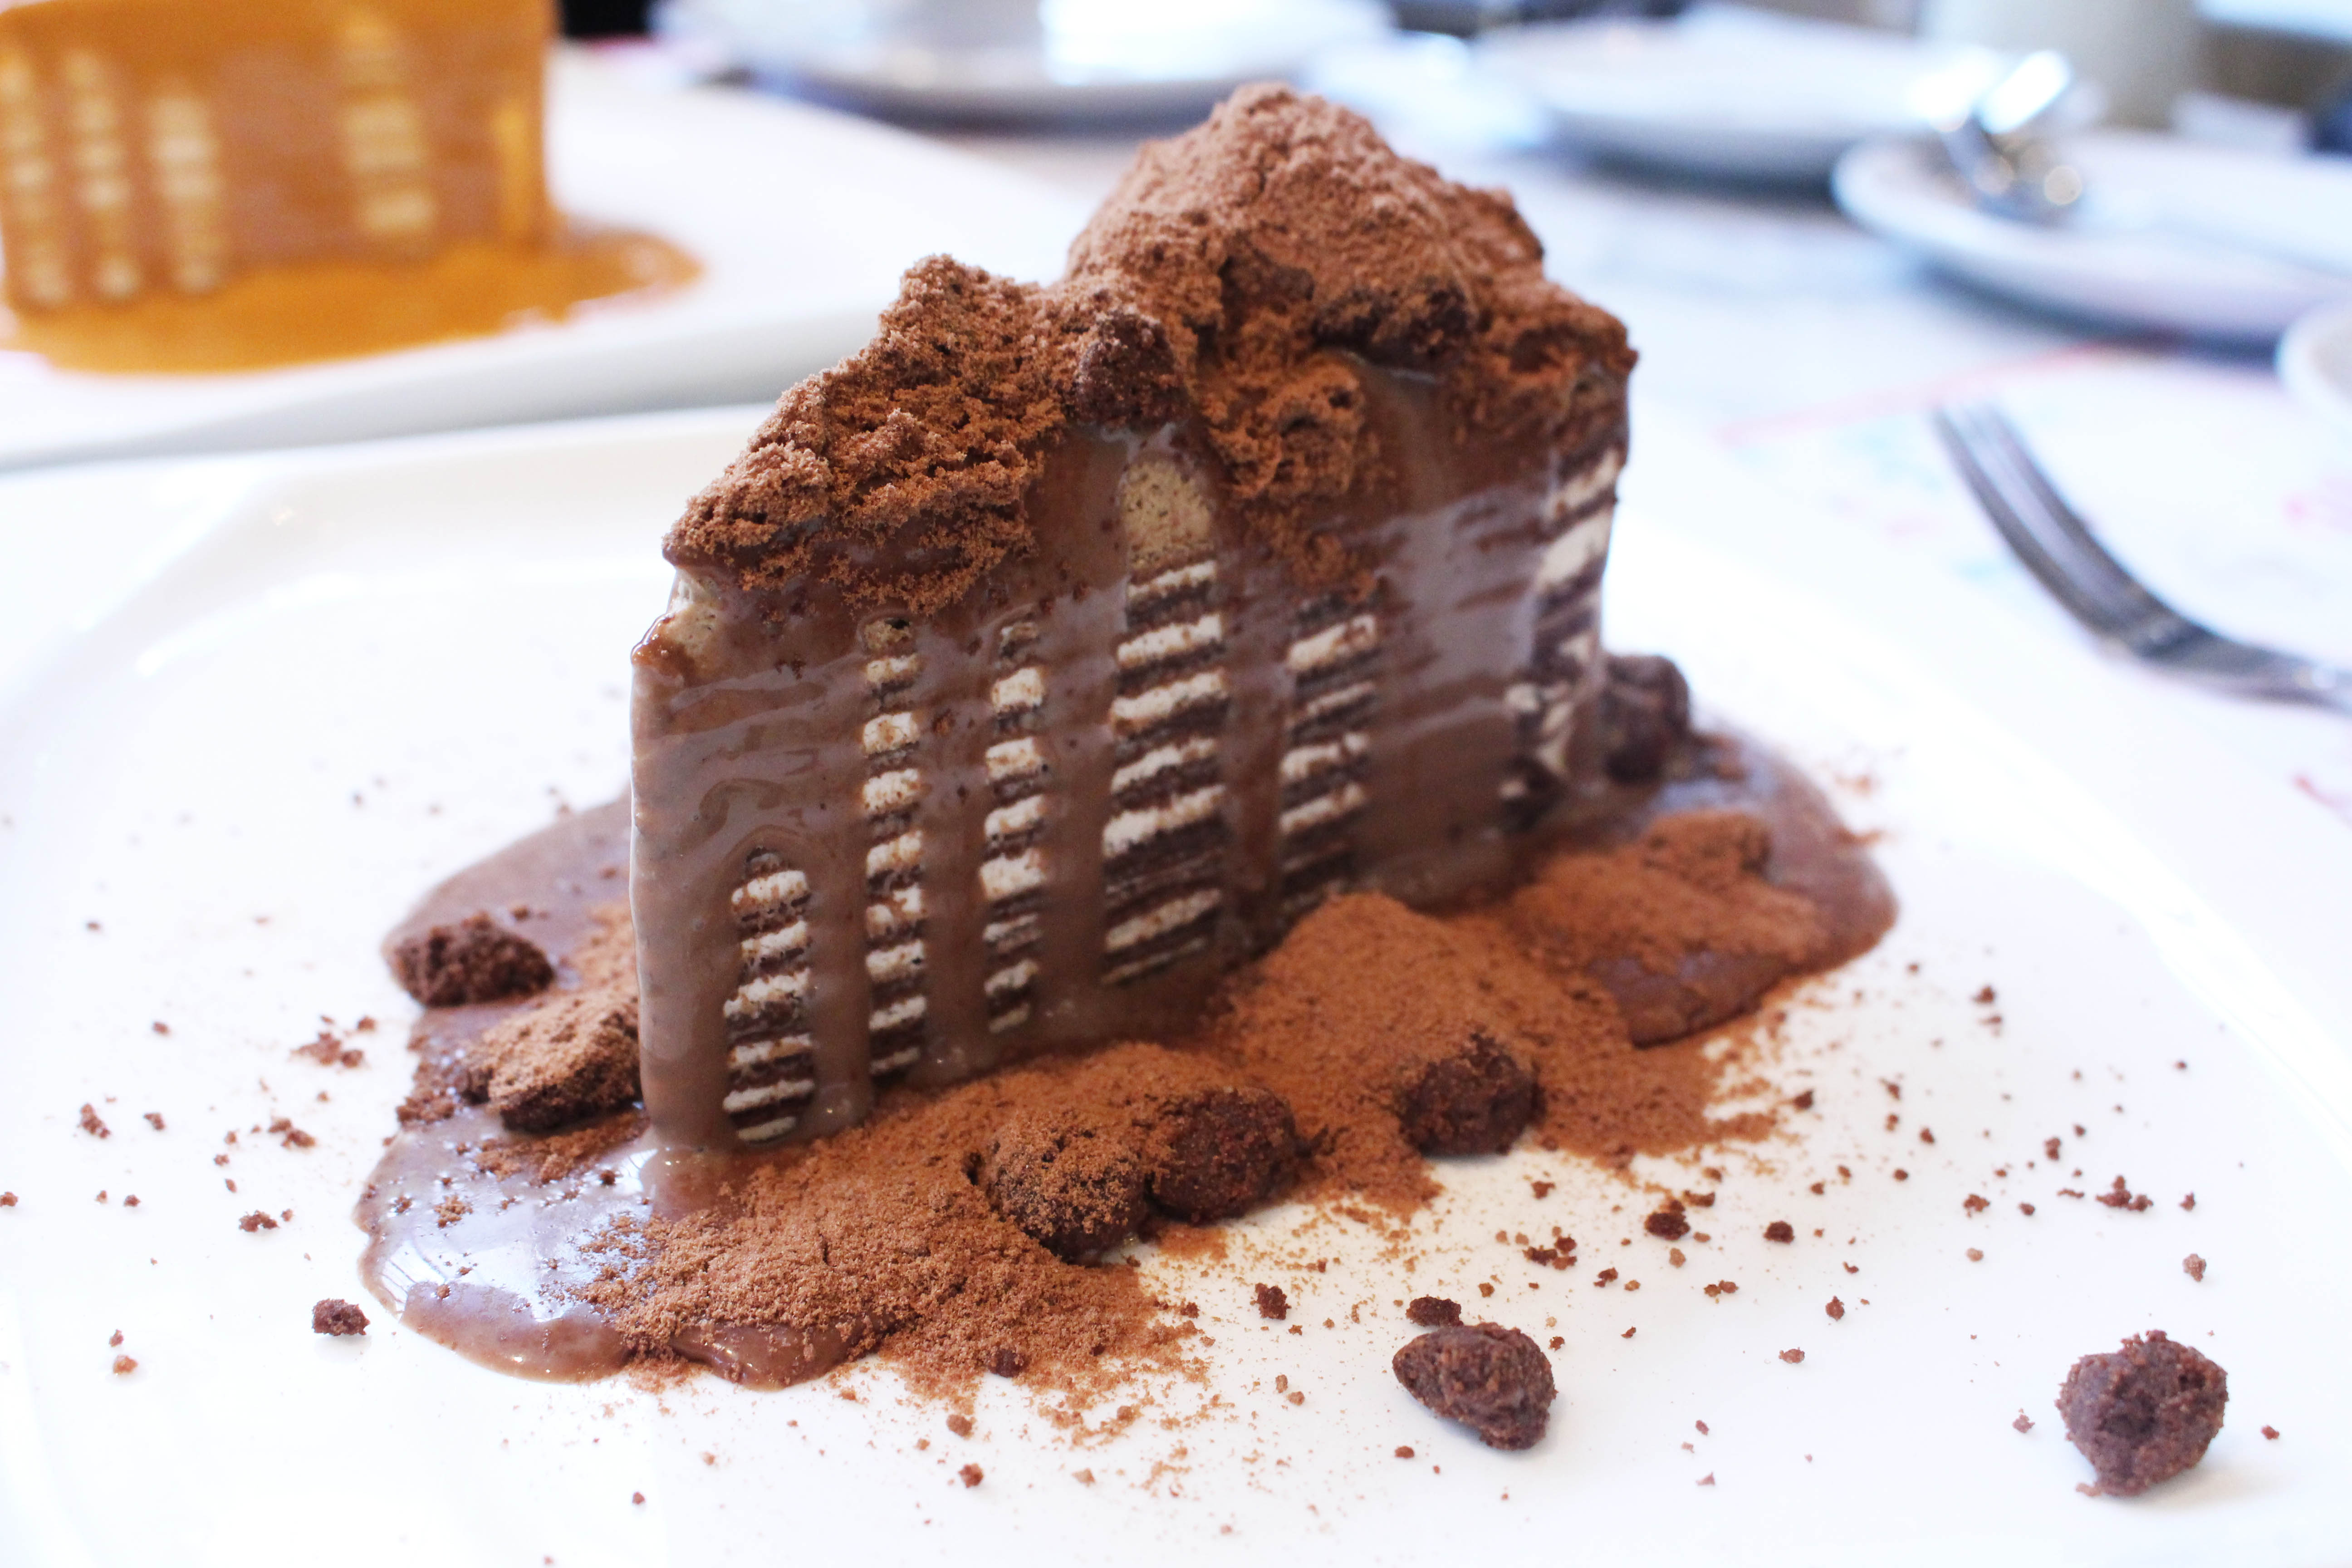 Milo Volcano Crepe cake that is approximately 5SGD, at Audrey Cafe and Bistro